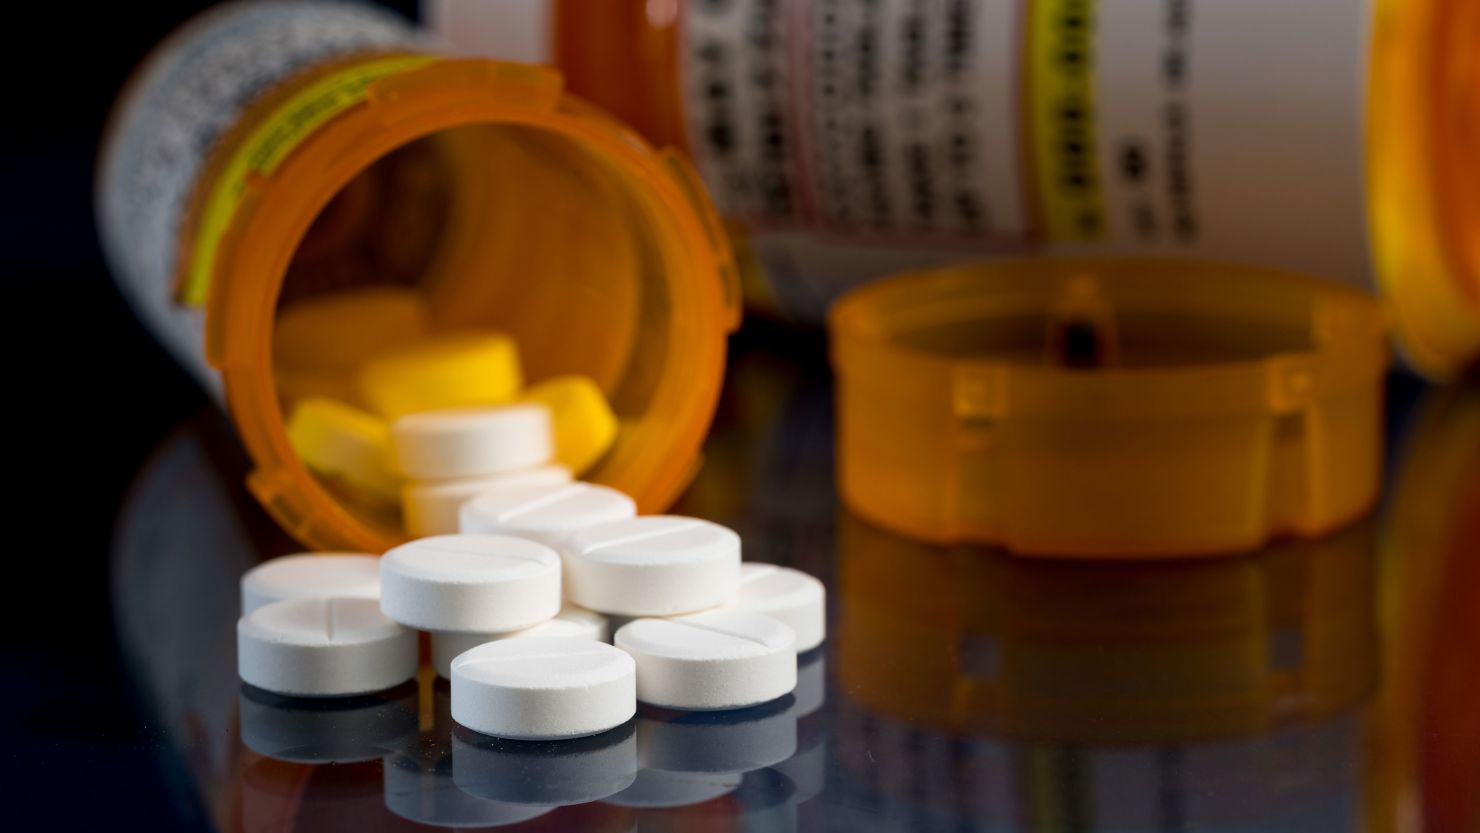 New CDC guidelines say opioids should not be the go-to option for pain, but they ease recommendations about dose limits.